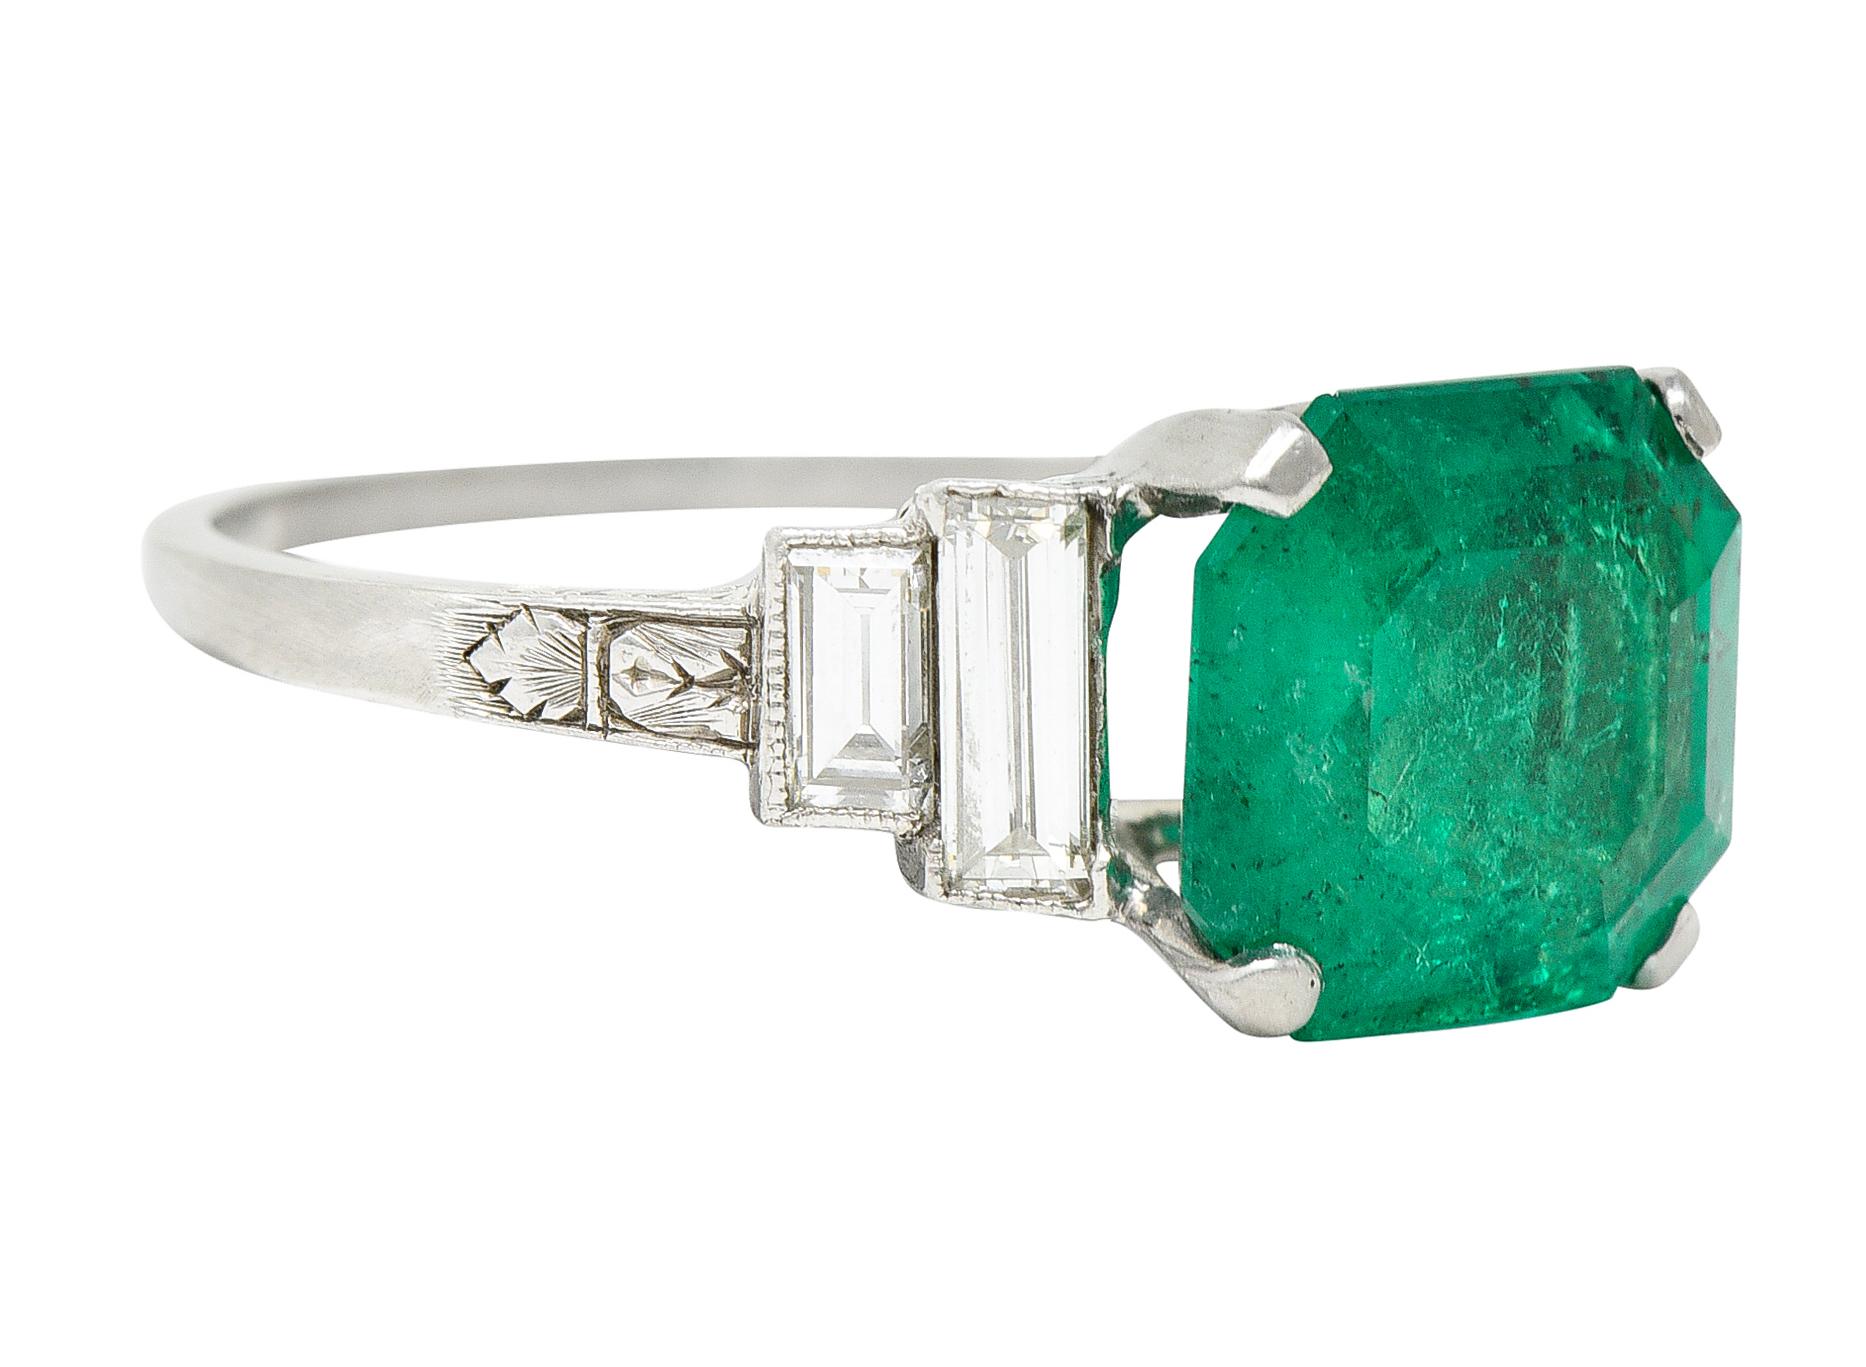 Featuring an octagonal cut Colombian emerald weighing approximately 3.43 carats

Very slightly blueish and strongly green in color - translucent with natural inclusions and moderate clarity enhancement (F2)

Basket set and flanked by stepped